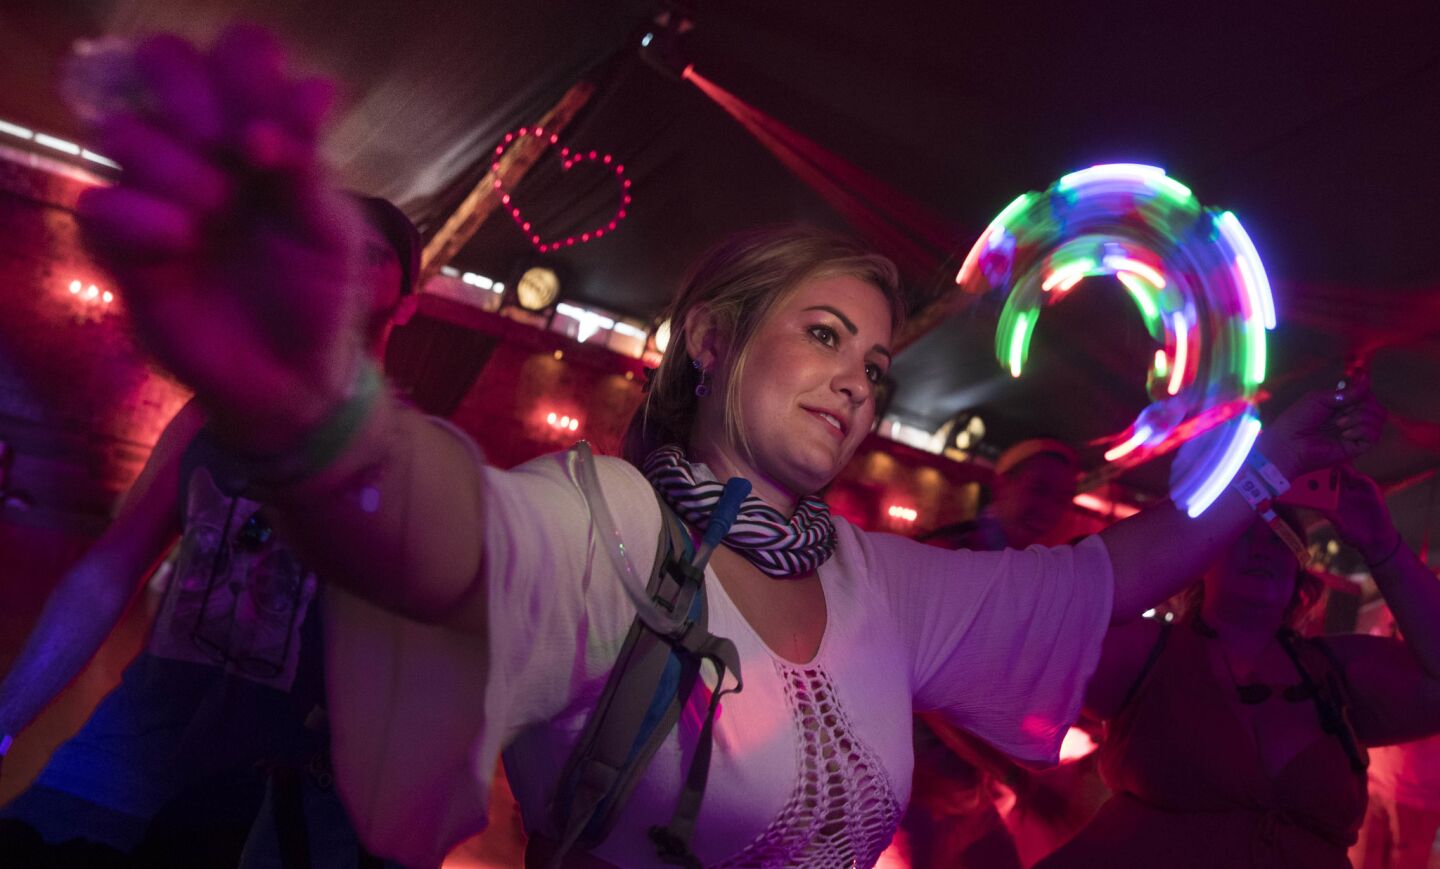 INDIO, CALIF. -- FRIDAY, APRIL 14, 2017: Lauren C, 28, of Temecula spins a LED light inside the Yuma tent at the Coachella Music and Arts Festival in Indio, Calif., on April 14, 2017. (Brian van der Brug / Los Angeles Times)